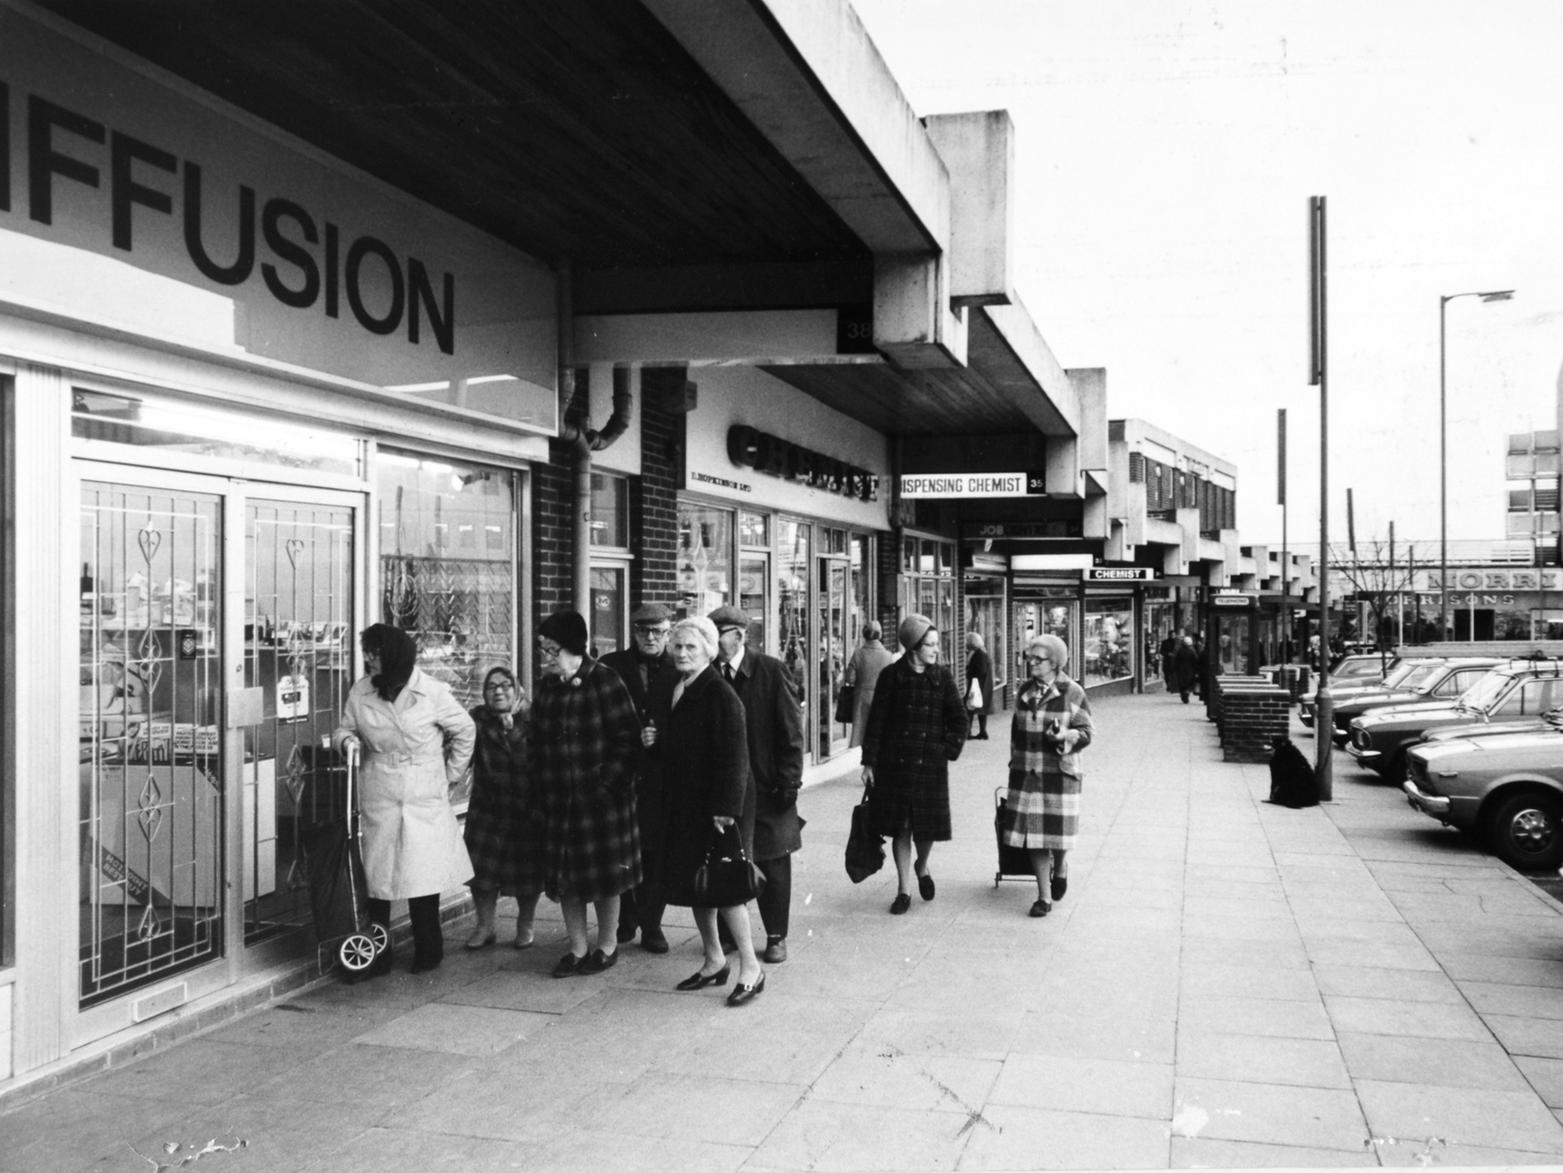 Did you shop at Bramley Shopping Centre back in the day?